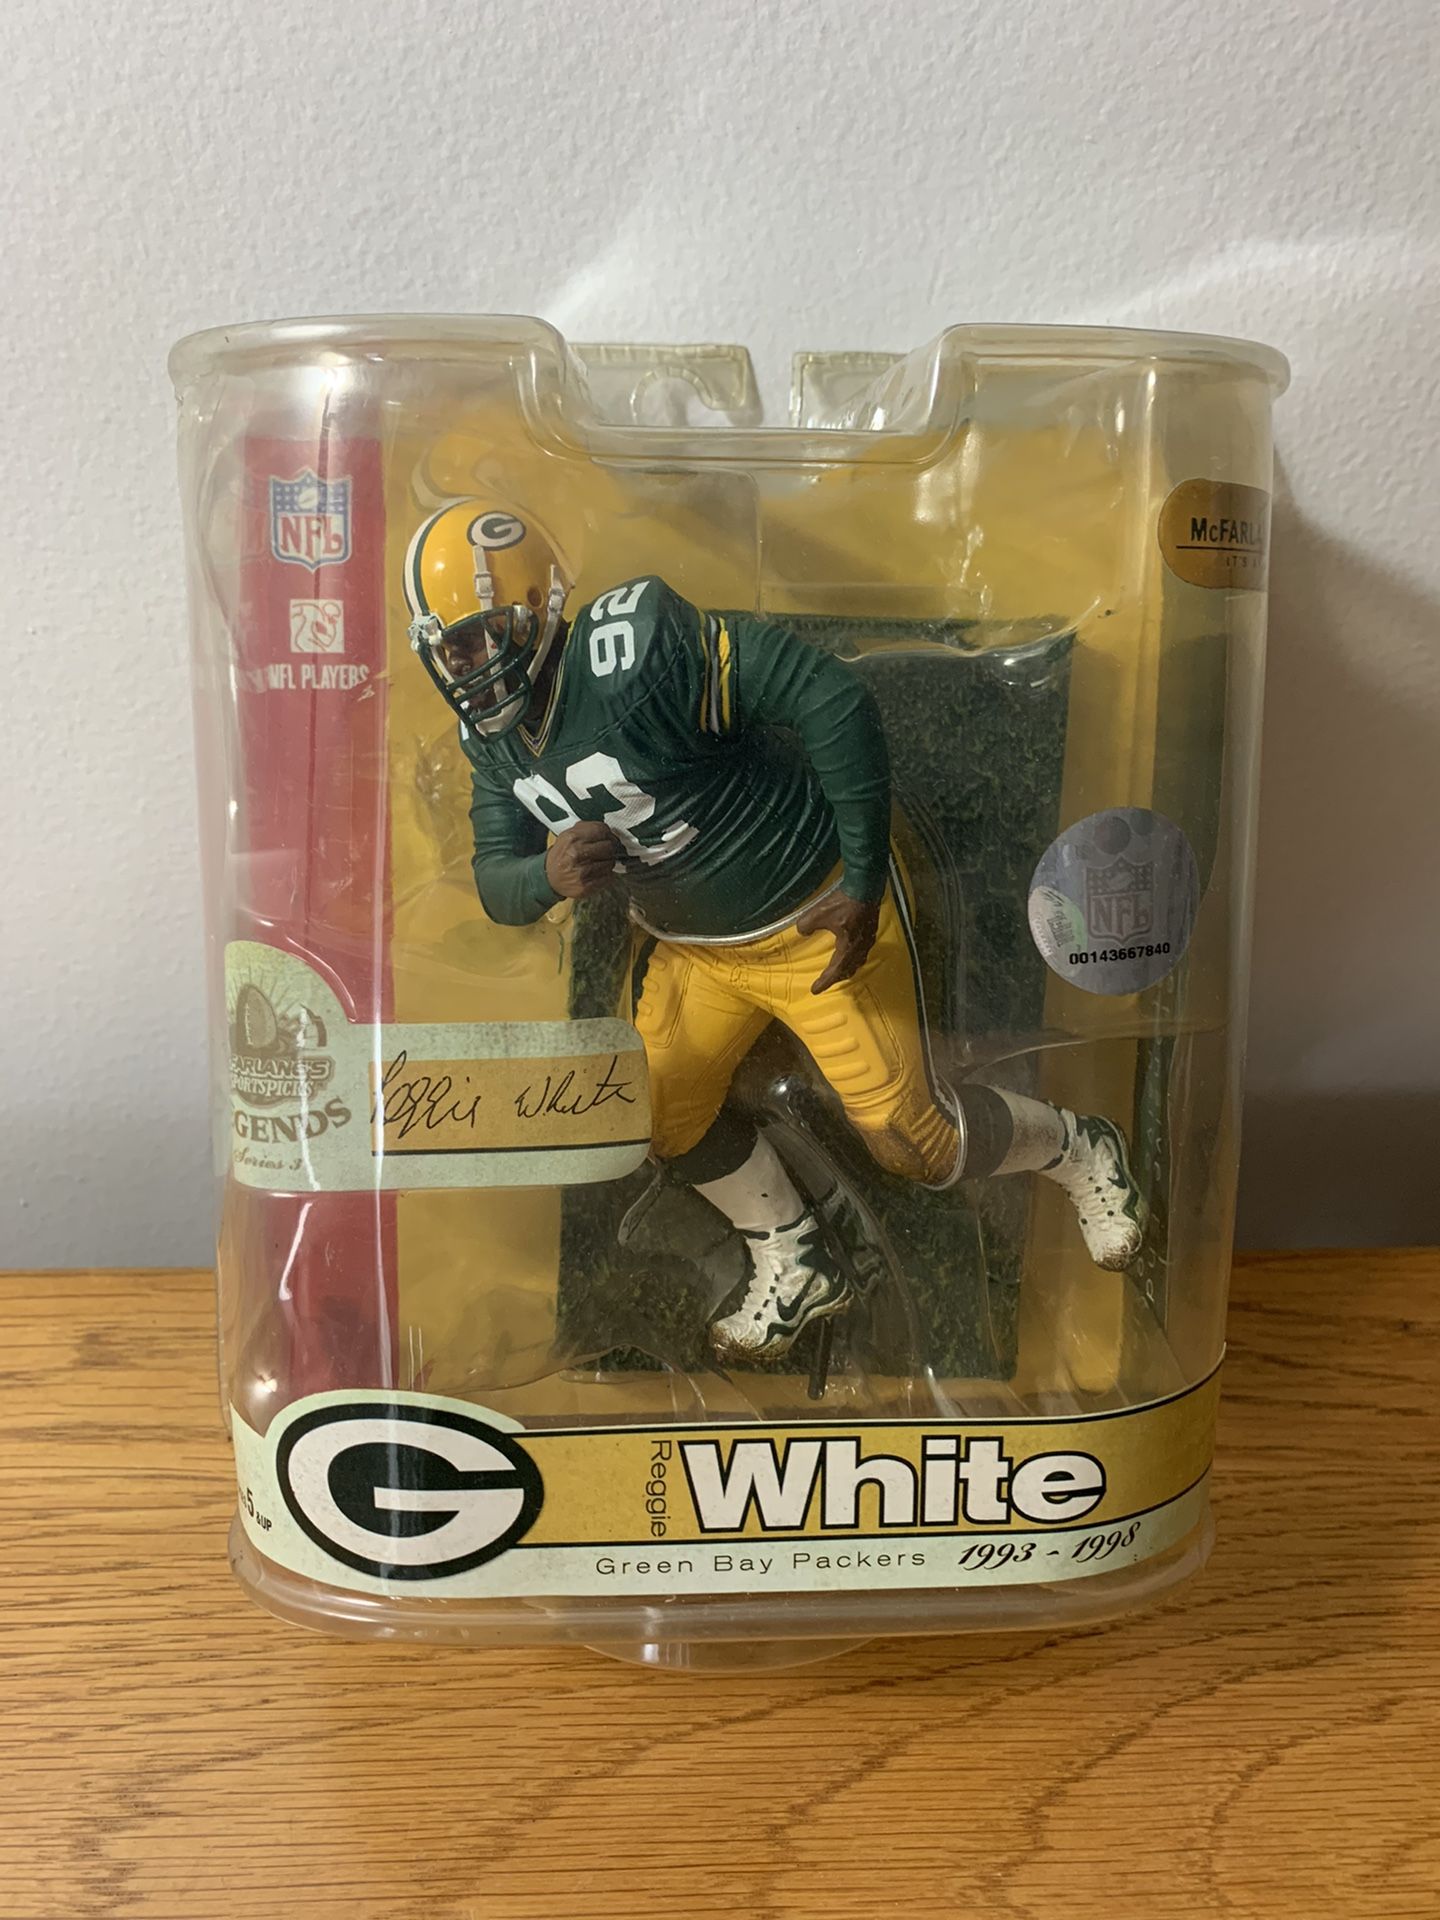 Green Bay Packers Legend Reggie White Action Figure